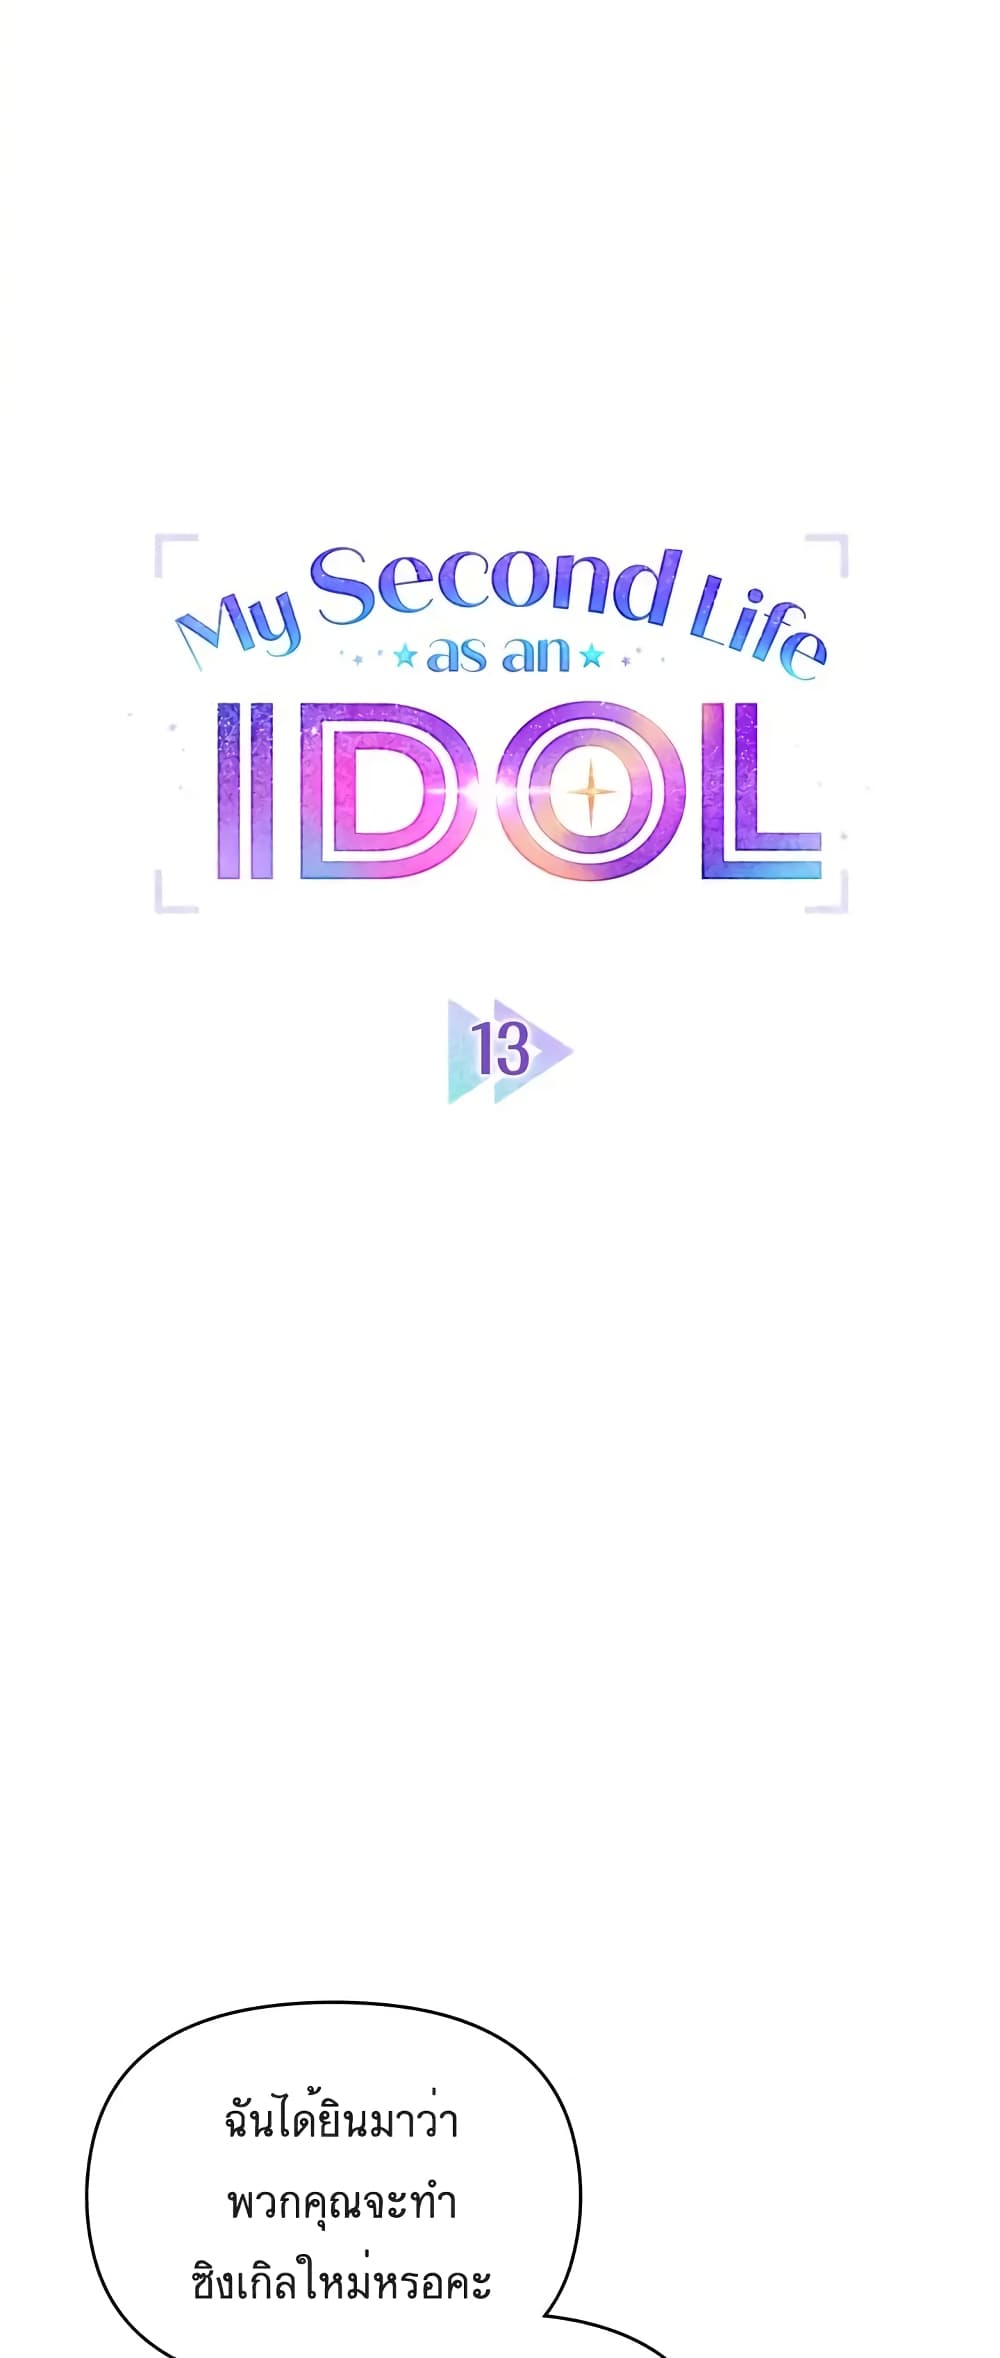 My Second Life as an Idol 13-13